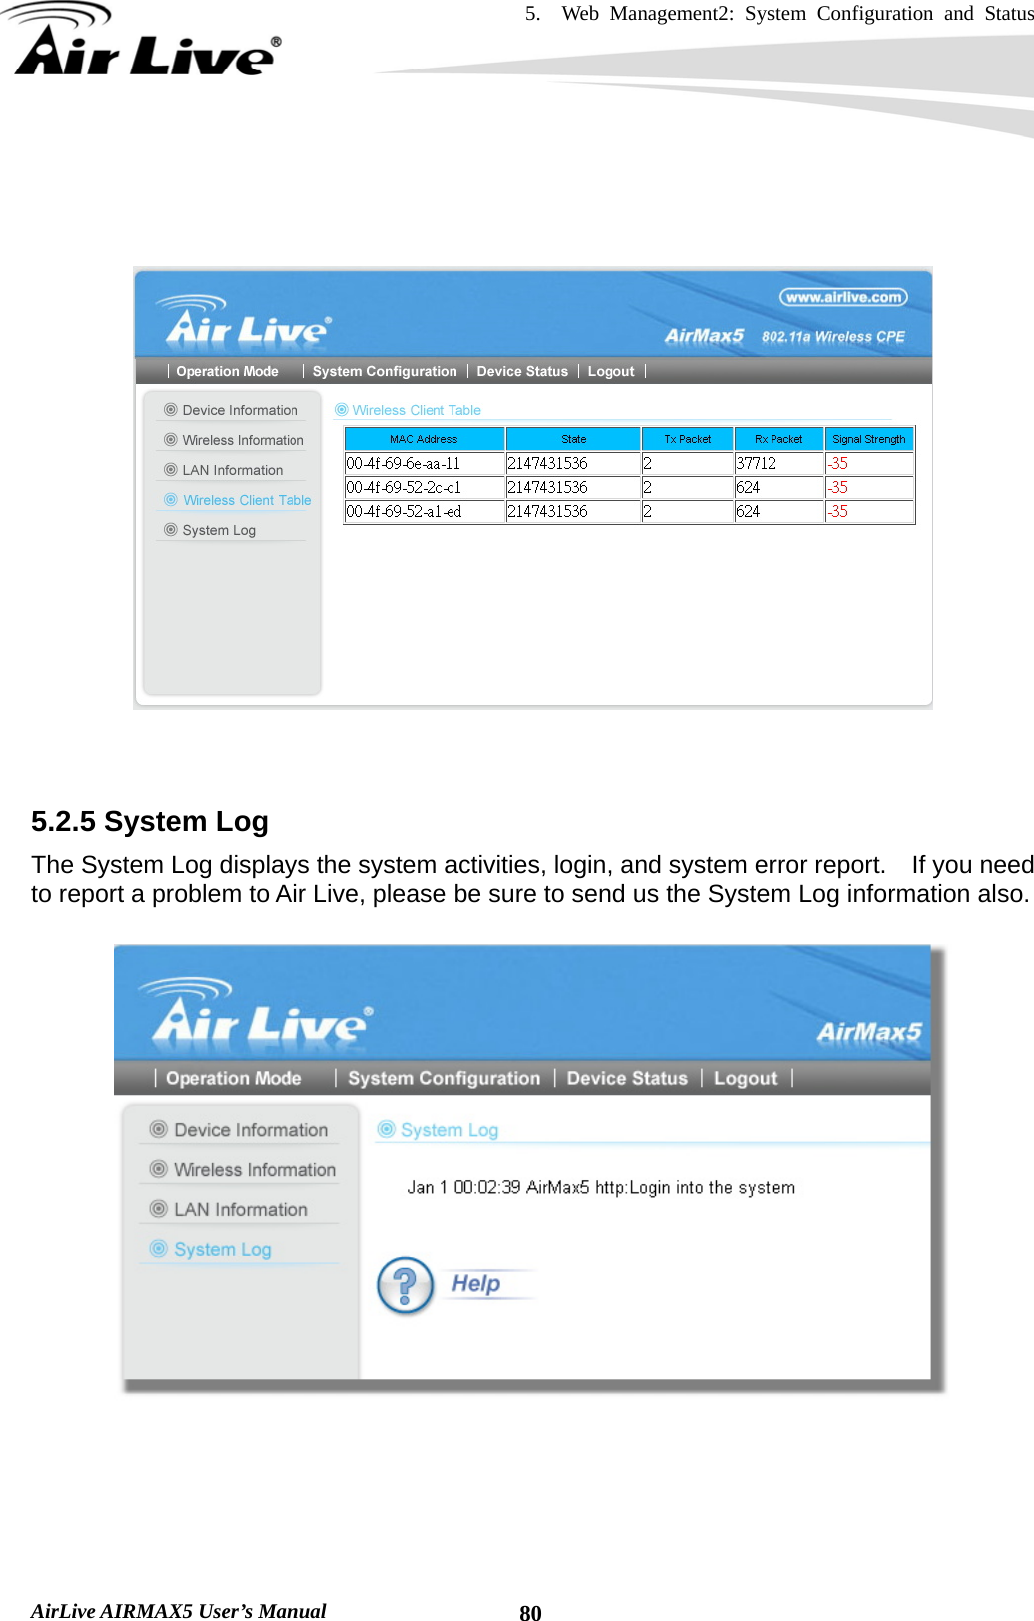 5.  Web Management2: System Configuration and Status    AirLive AIRMAX5 User’s Manual  80      5.2.5 System Log The System Log displays the system activities, login, and system error report.  If you need to report a problem to Air Live, please be sure to send us the System Log information also.    